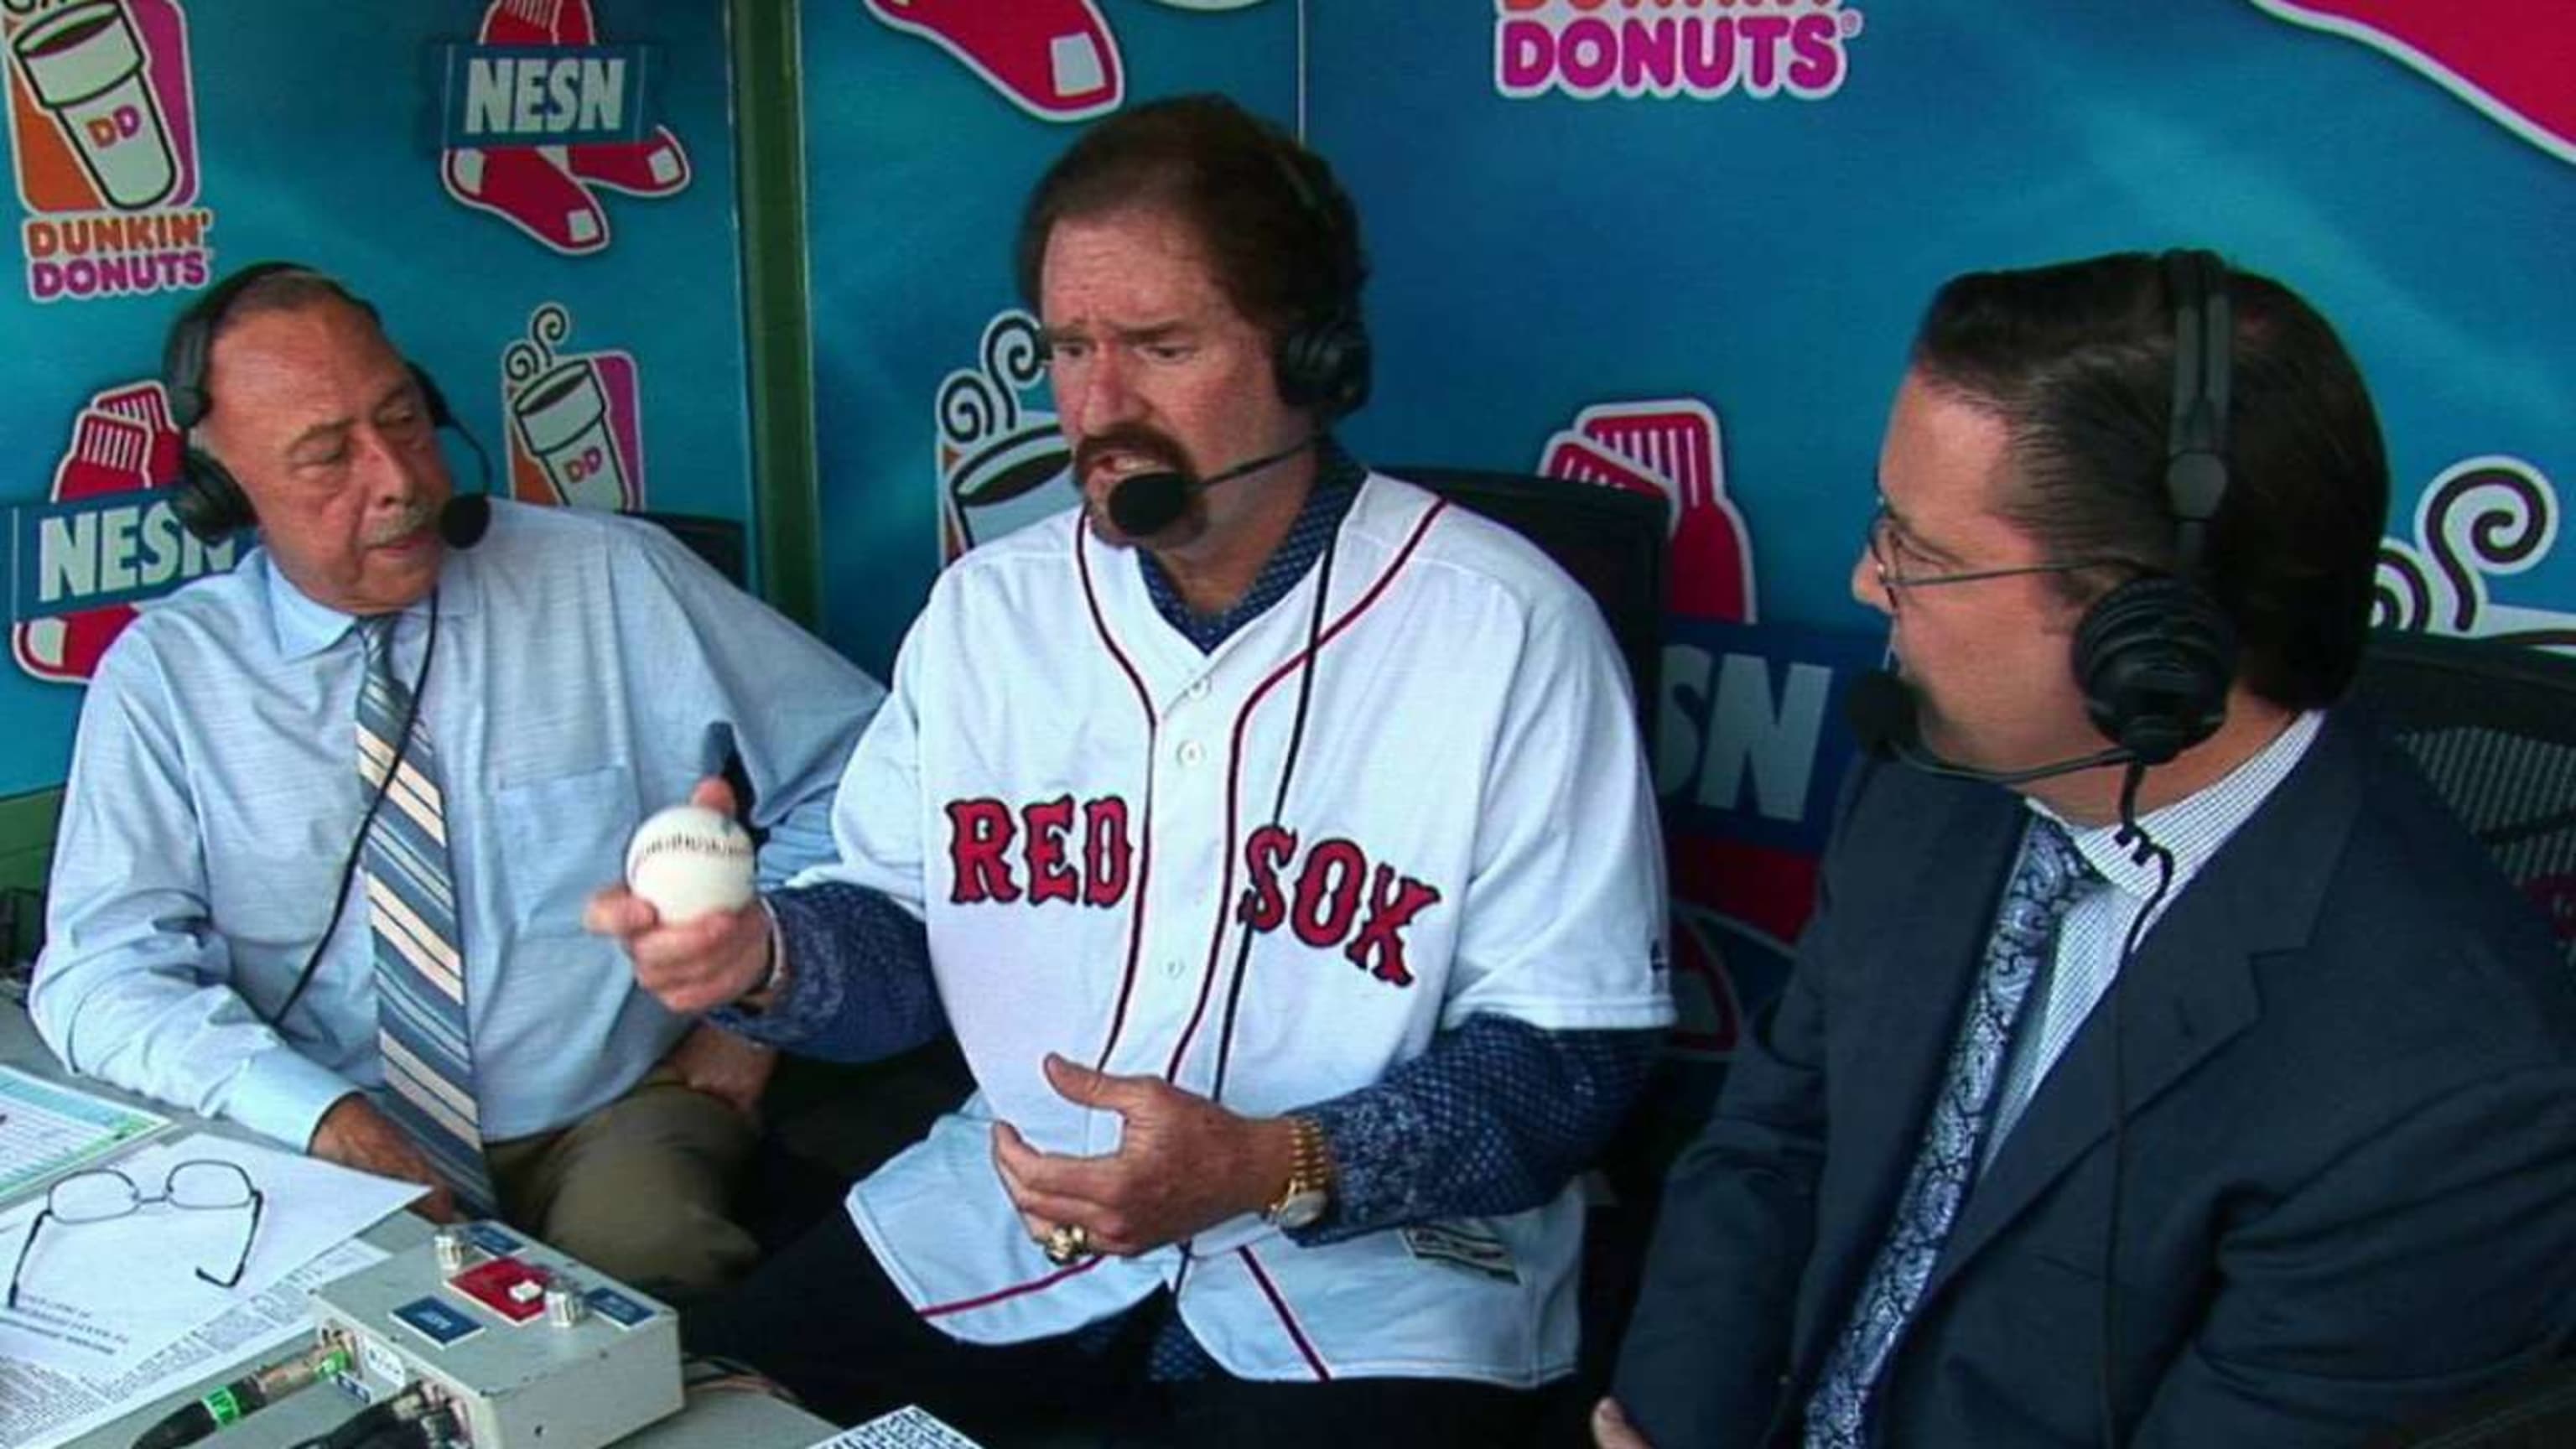 Wade Boggs looks on as his number, 26, is unveiled with Red Sox